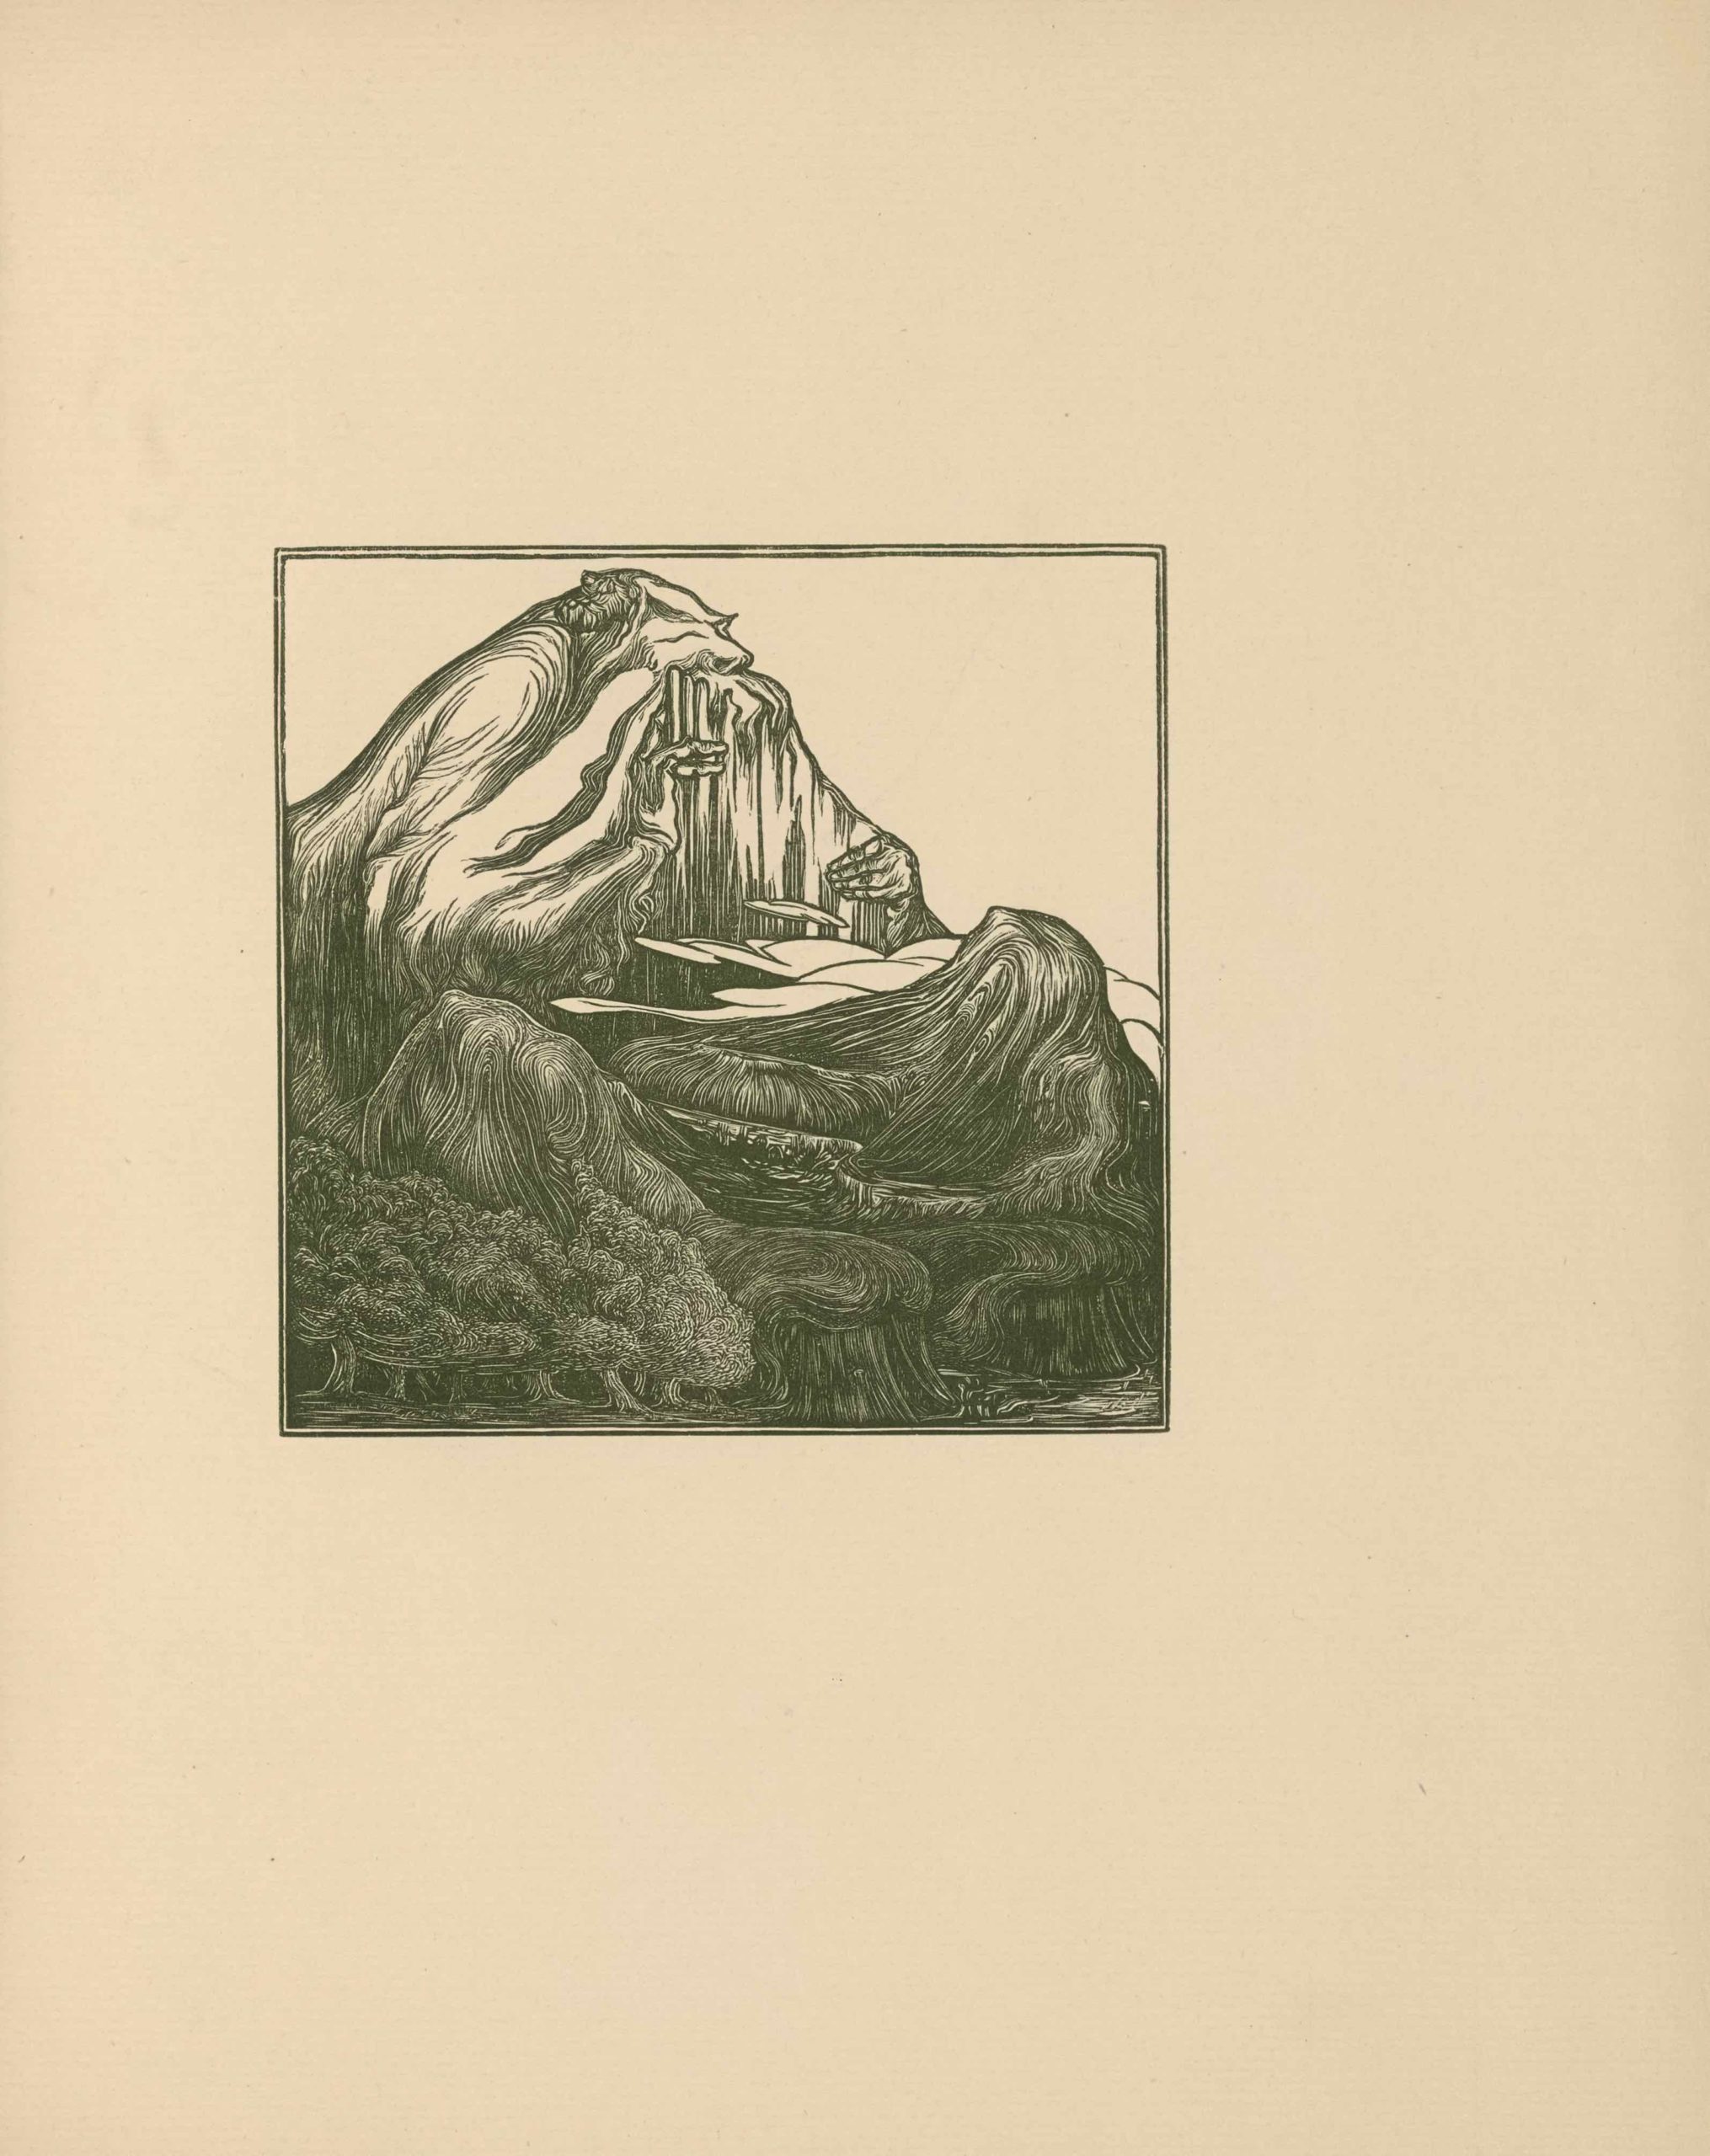 The wood engraving is set into a square border, printed, as is the image, in dark green ink. The image depicts a fantastic landscape in which a hulking mountain is anthropomorphized to look like an enormous humanoid creature playing the panpipes, which are actually sheer cliffs. The figure’s brow, nose, arms, and hands are clearly discernible. The mountain figure takes up much of the background, extending almost to the top of the frame, set against a blank backdrop. The mountain figure’s beard, composed of drooping snow piles, hangs over the pipes. Below the mountain figure drift clouds over lower mountains and cliffs in the middleground. The foreground is occupied by a grove of dark trees on the left and a body of water in the right corner.